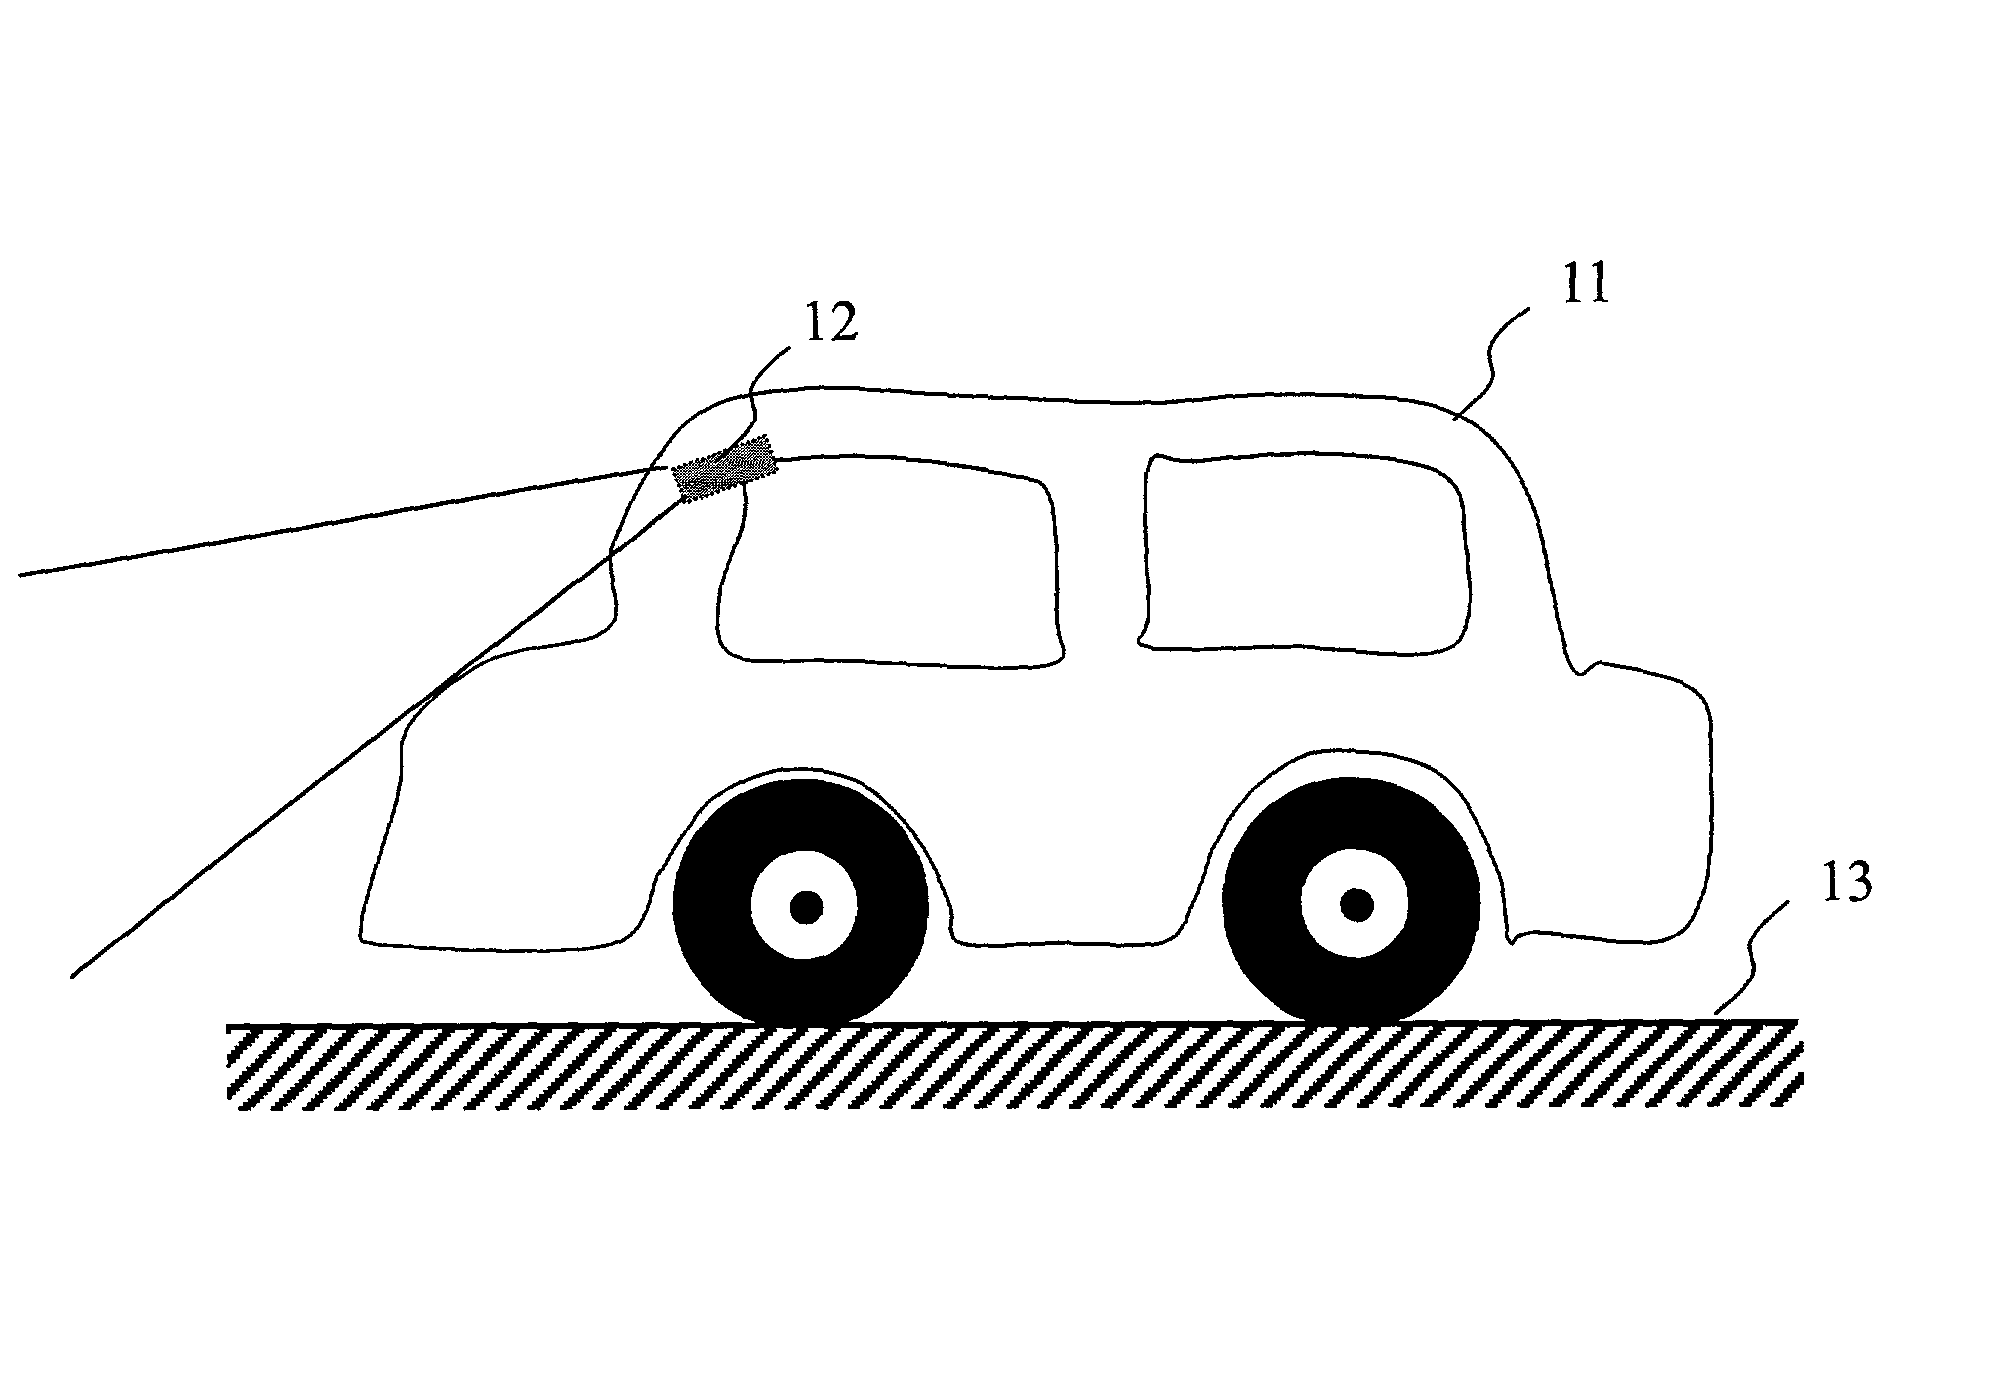 Monocular computer vision aided road vehicle driving for safety